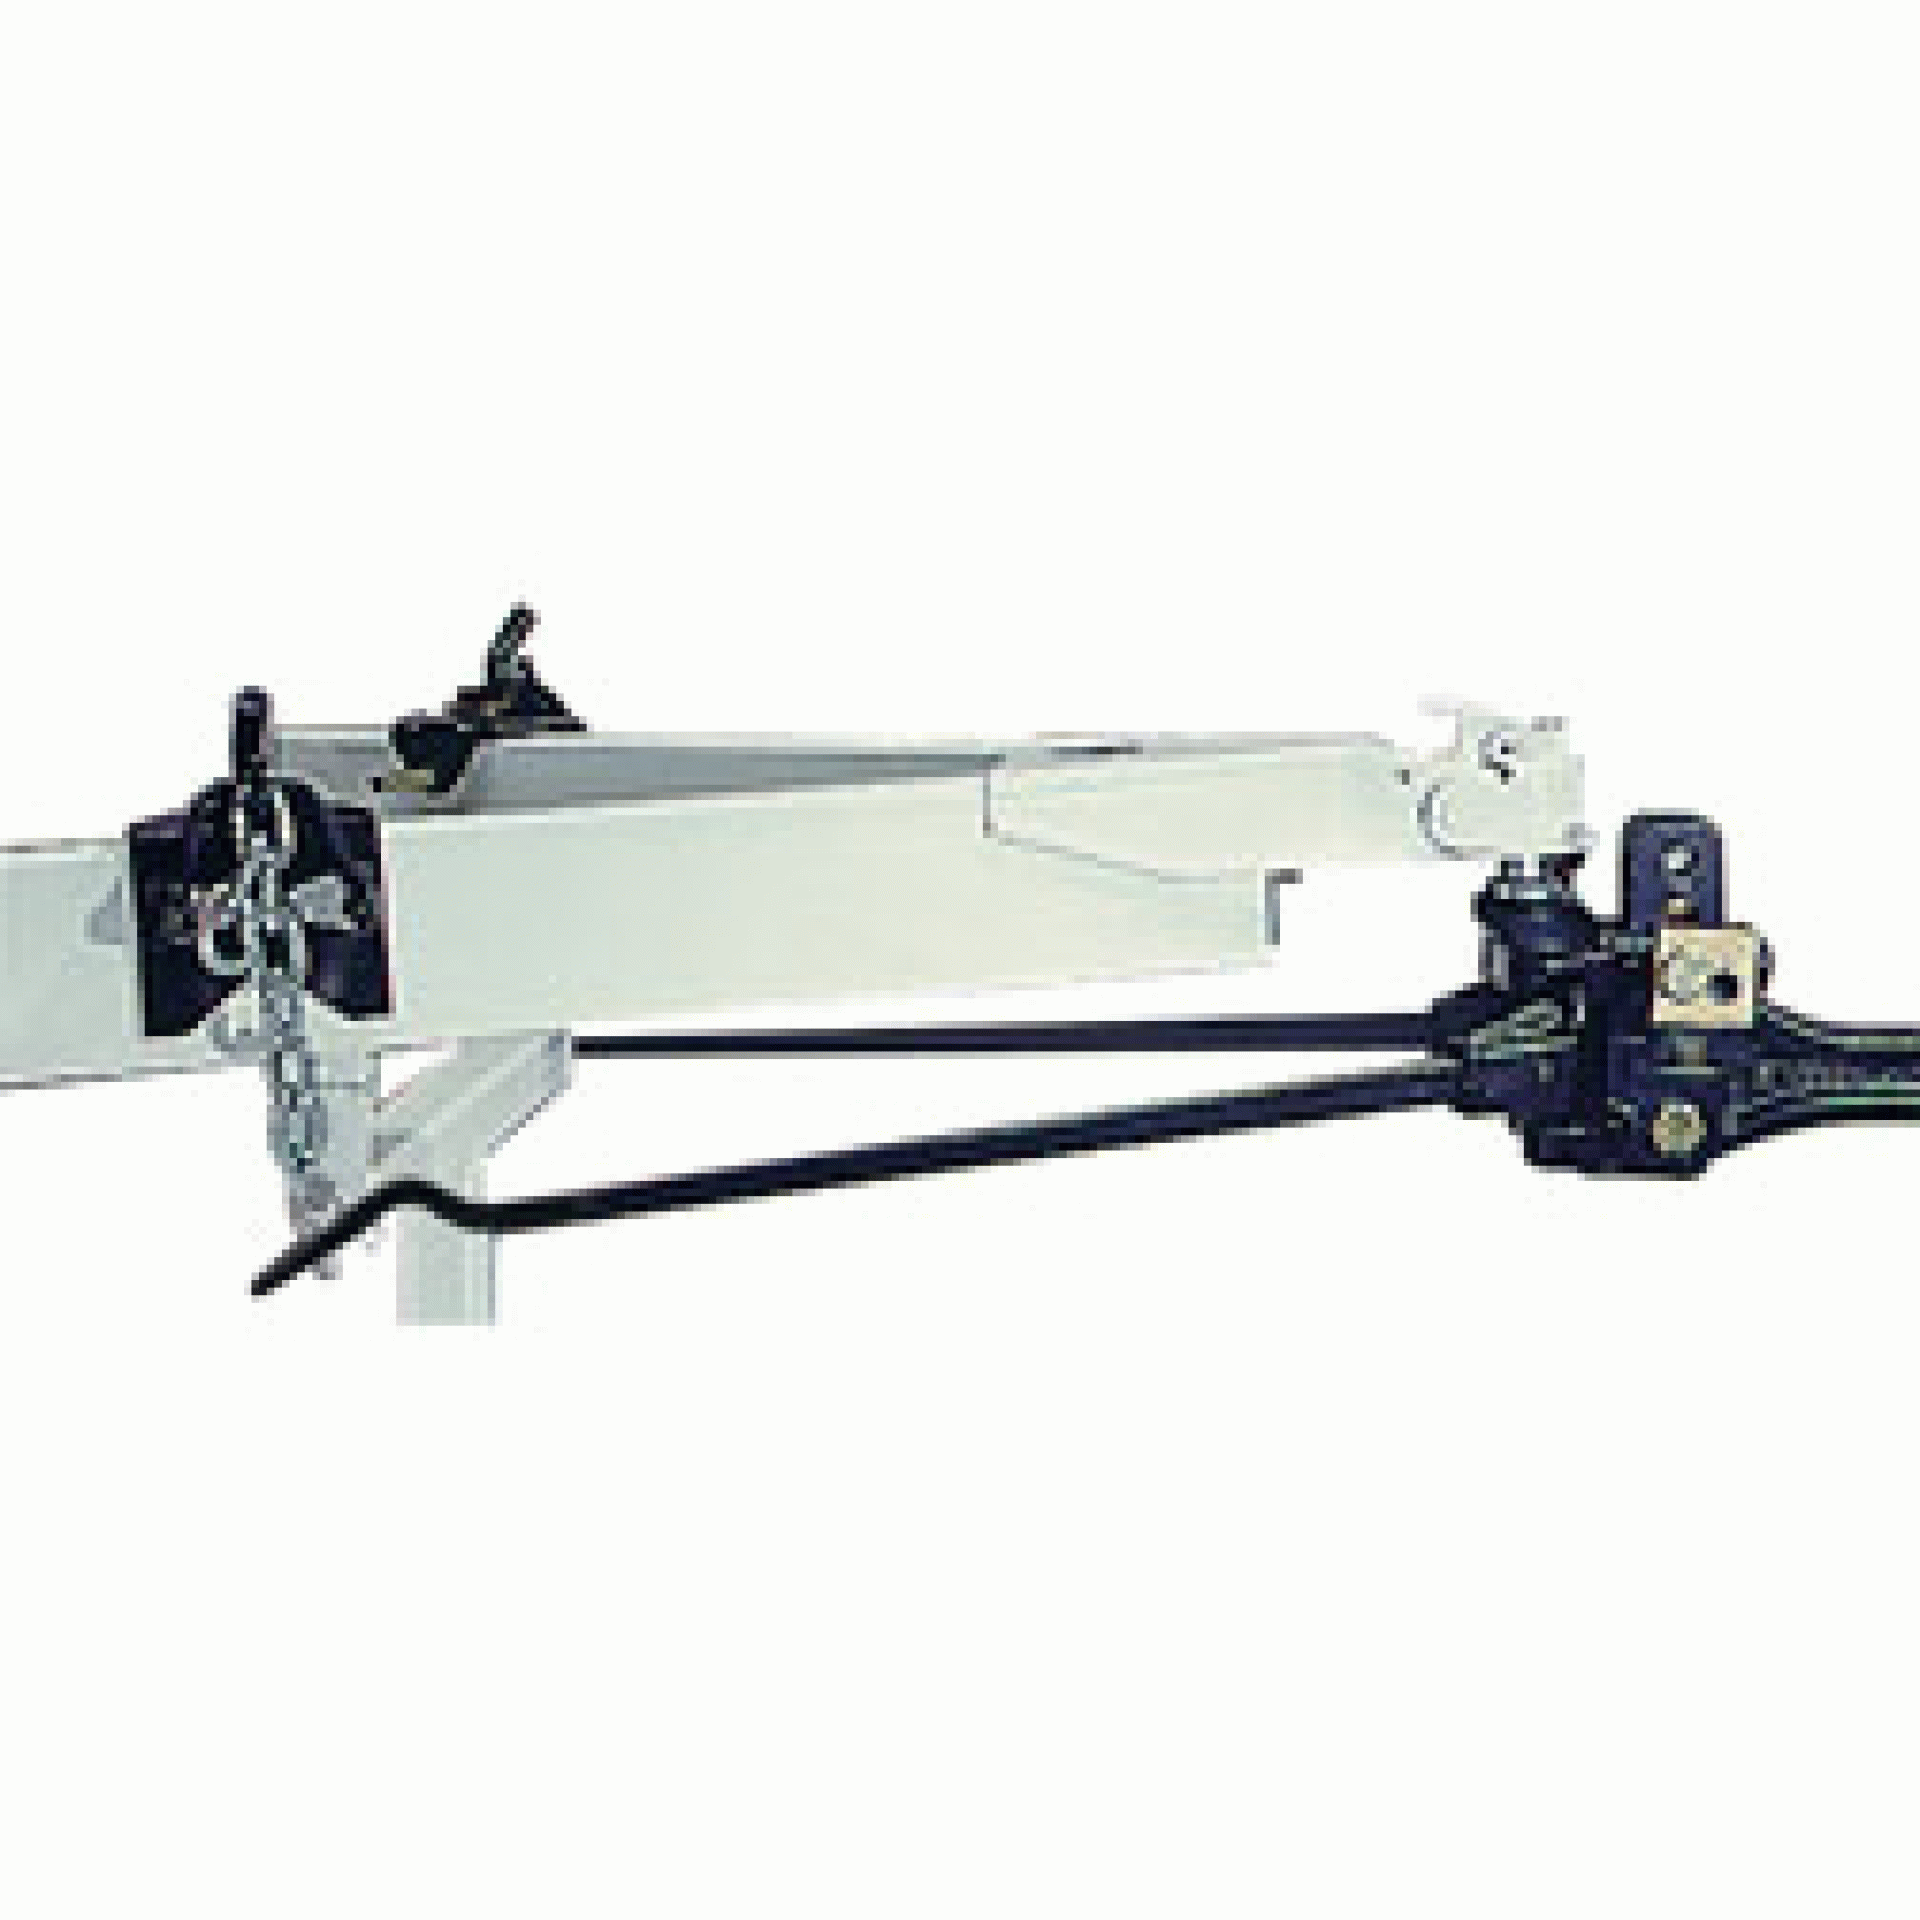 REESE | 66006 | Hitch Titan Weight Distribution 17 000 Lbs. GTW - 1 700 Tongue Weight